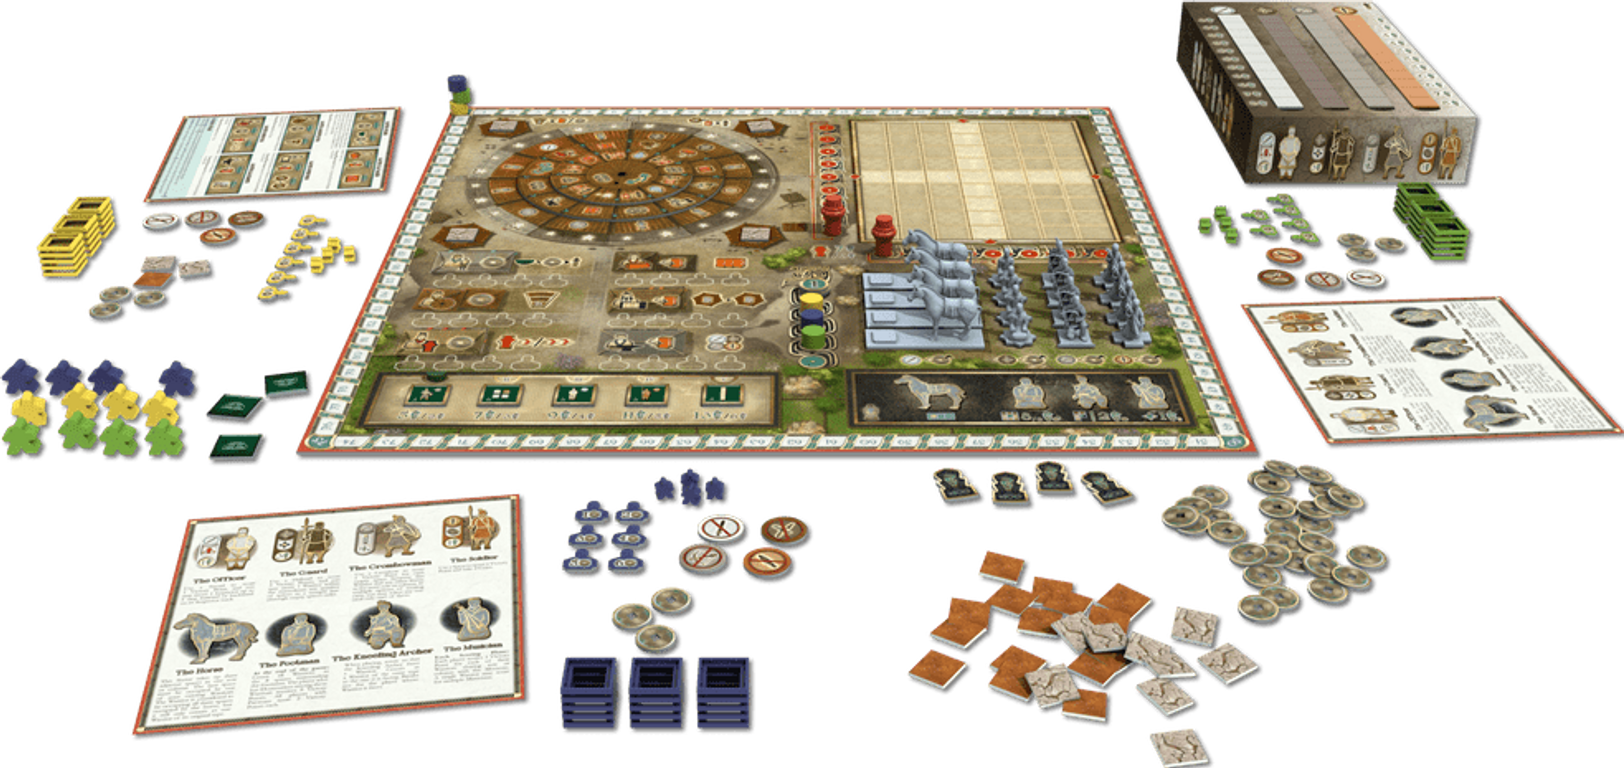 Terracotta Army components